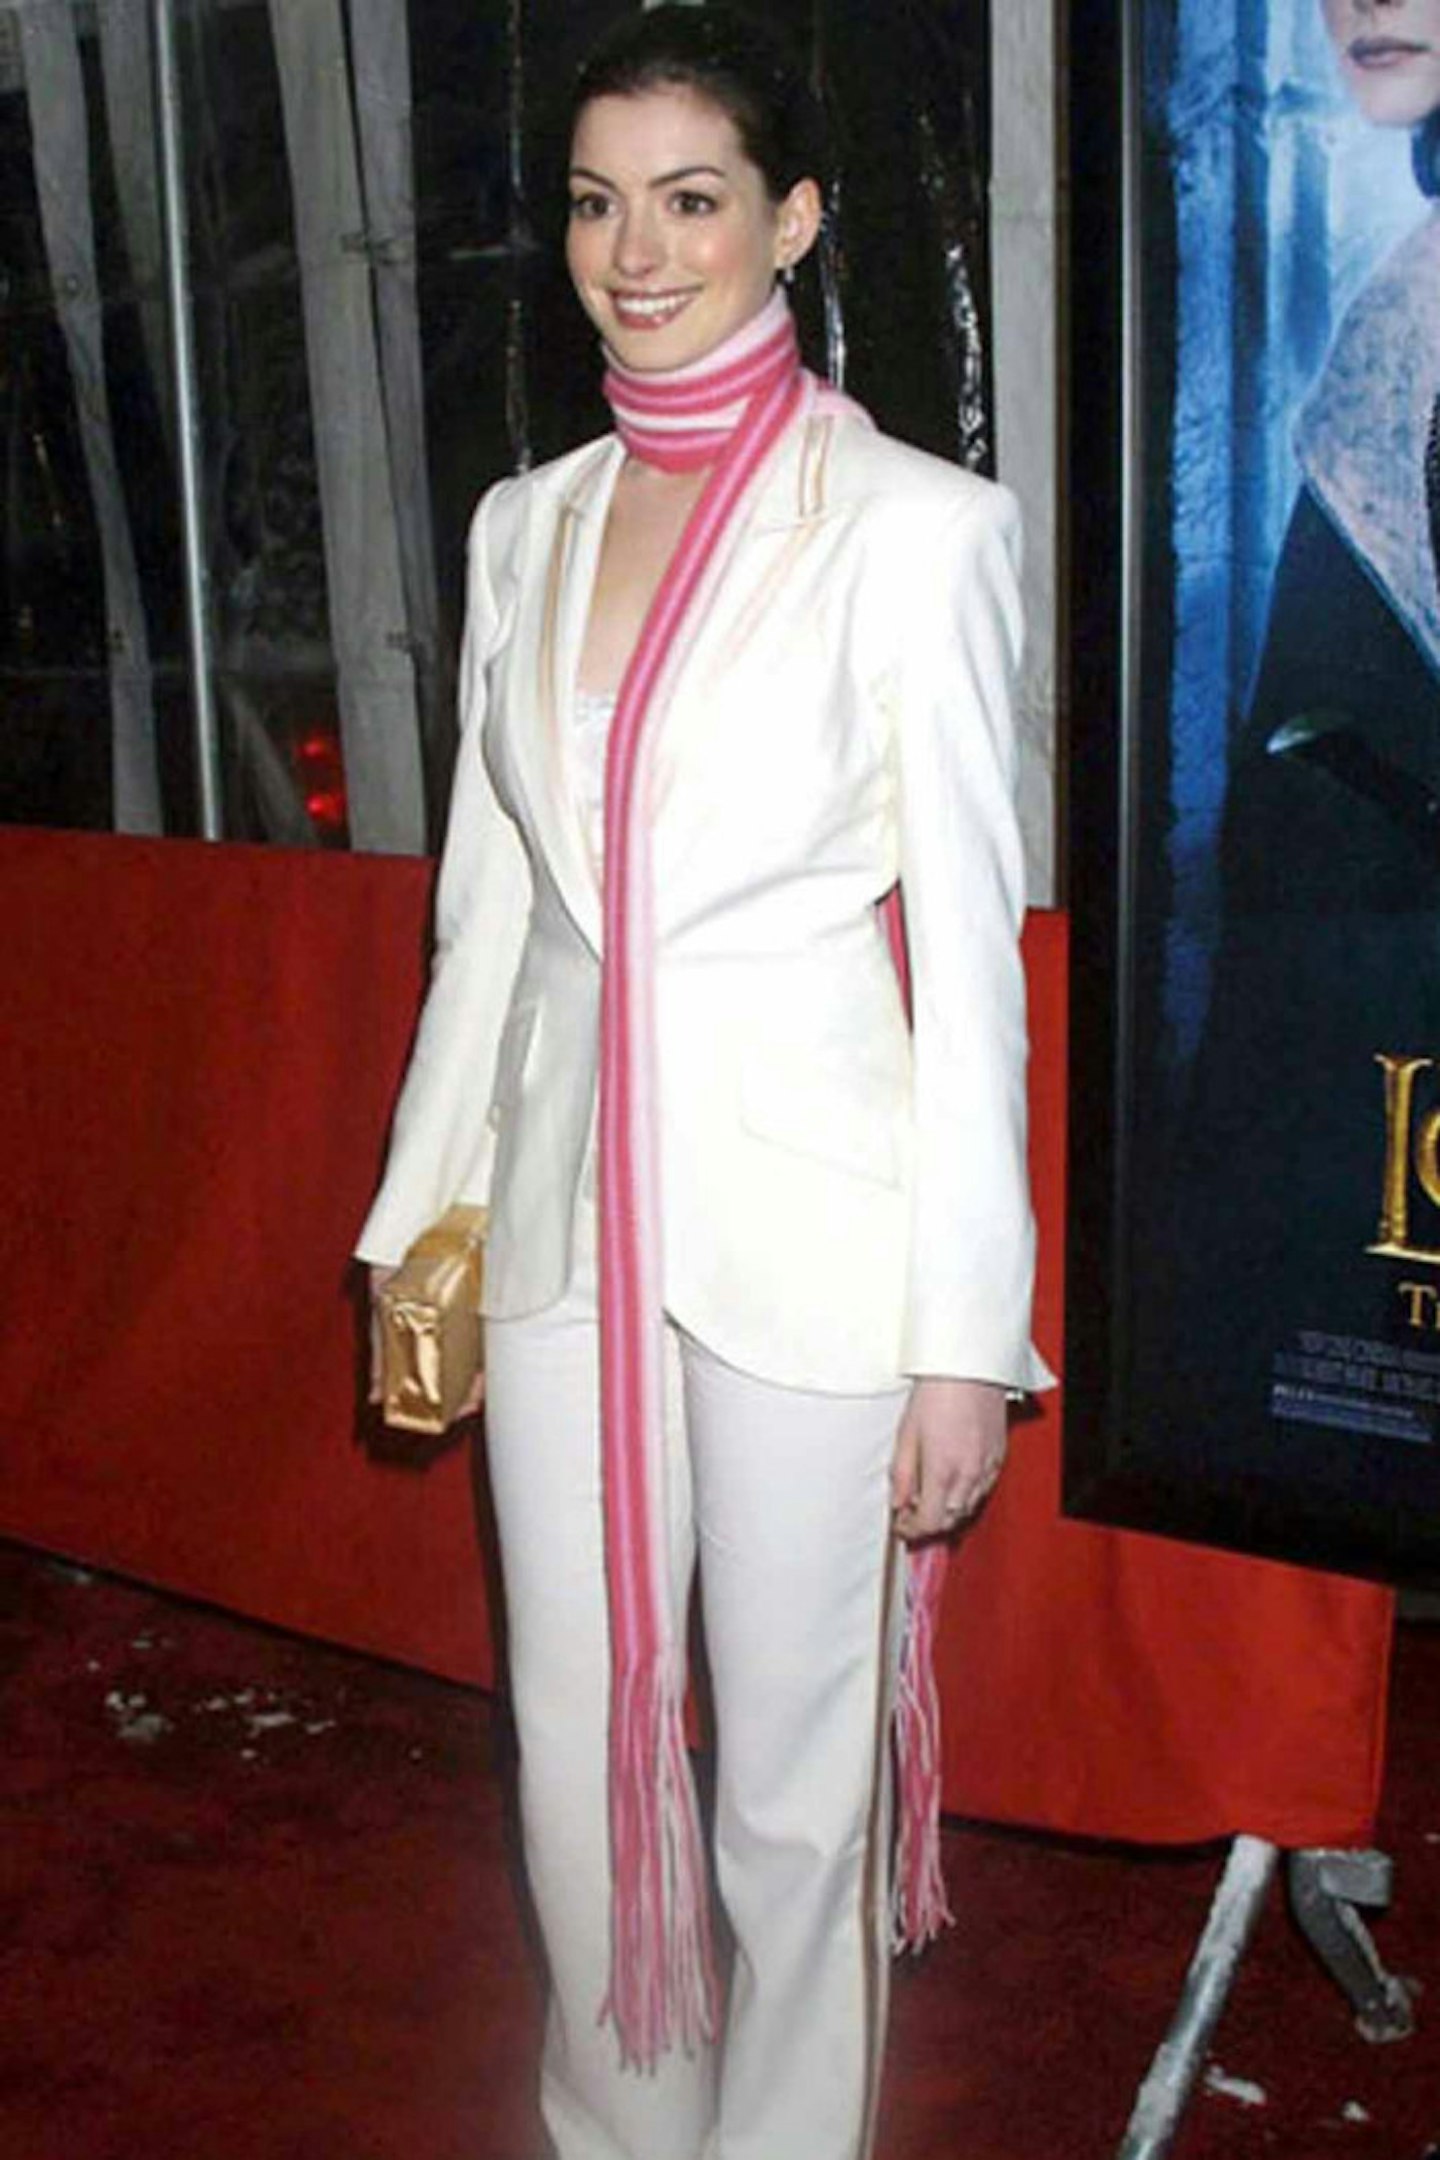 Anne Hathaway 2005 style pink scarf white suit